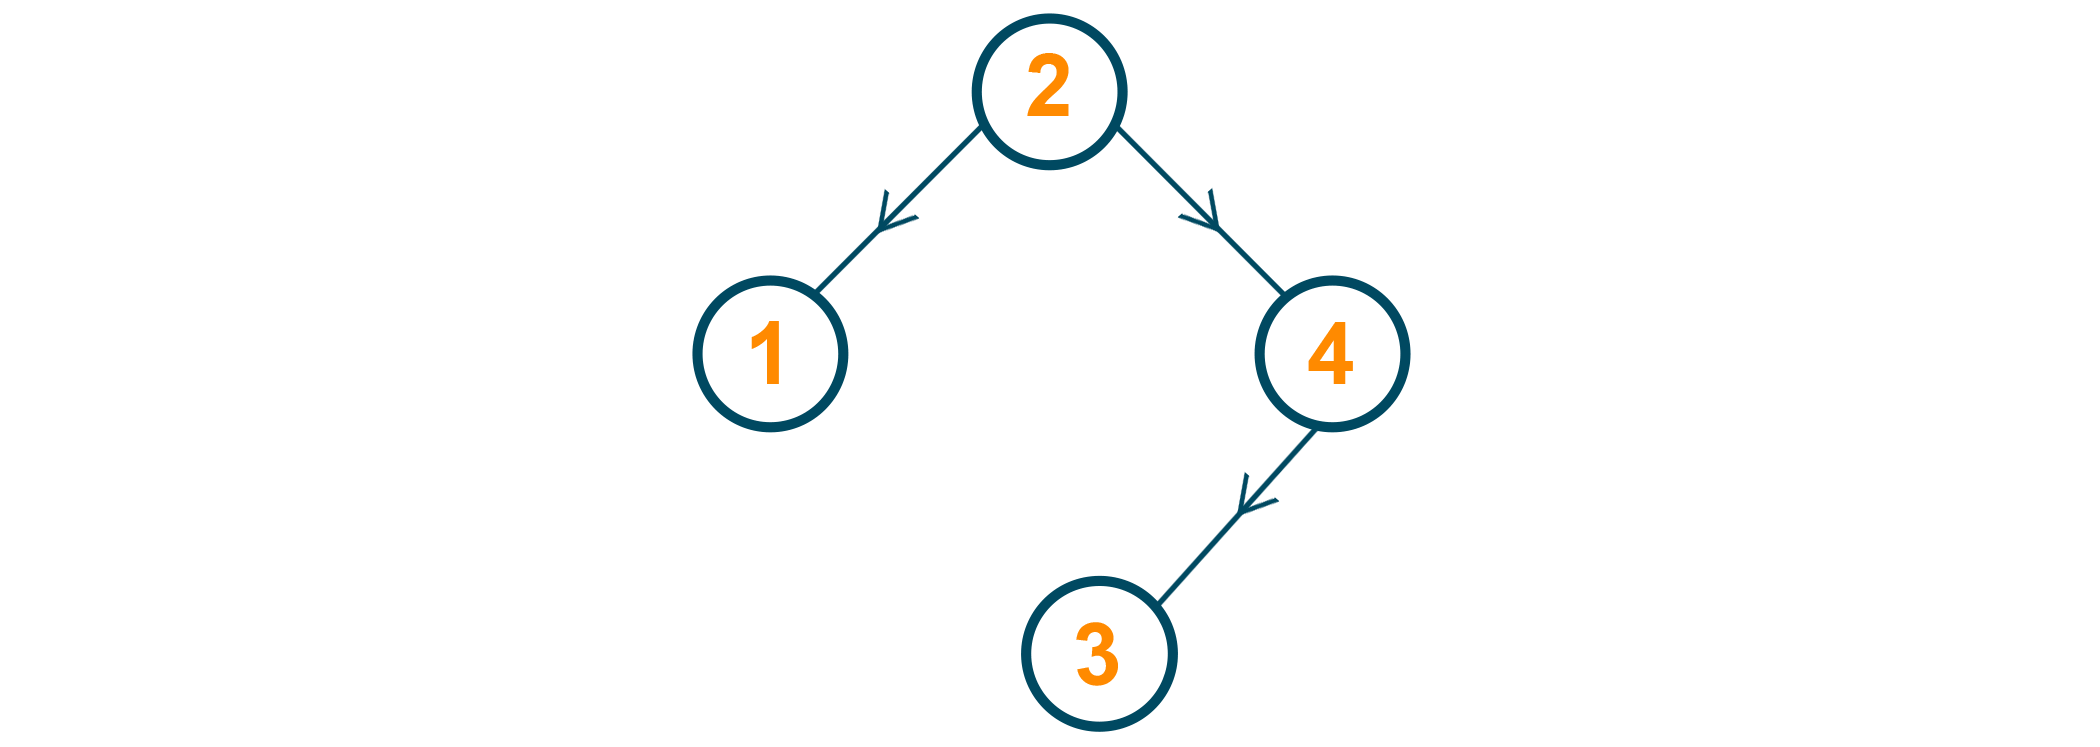 Node 3 is inserted as the left child for Node 4